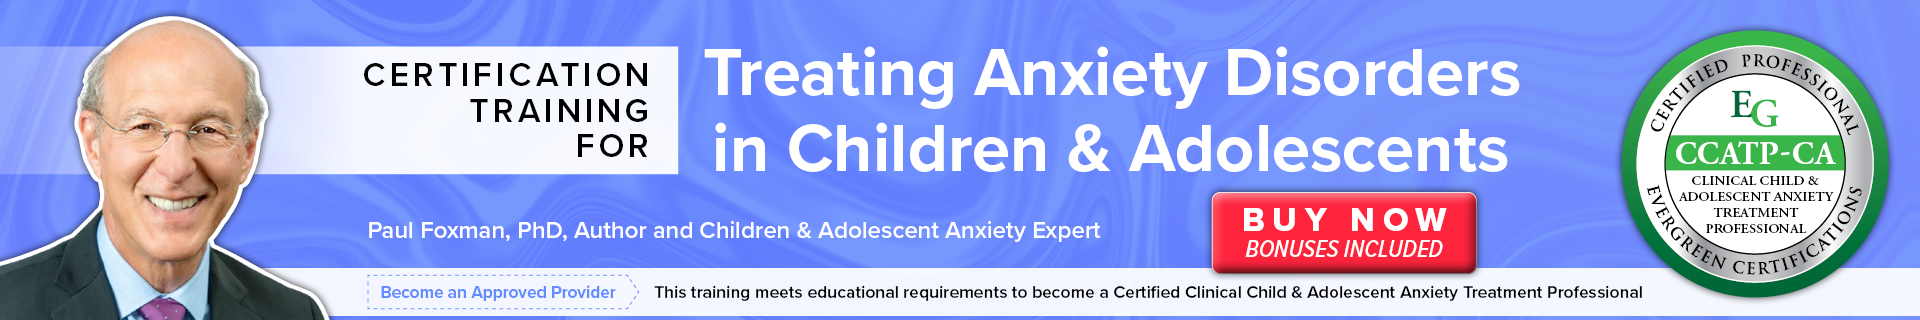 Certification Training for Treating Anxiety Disorders in Children & Adolescents